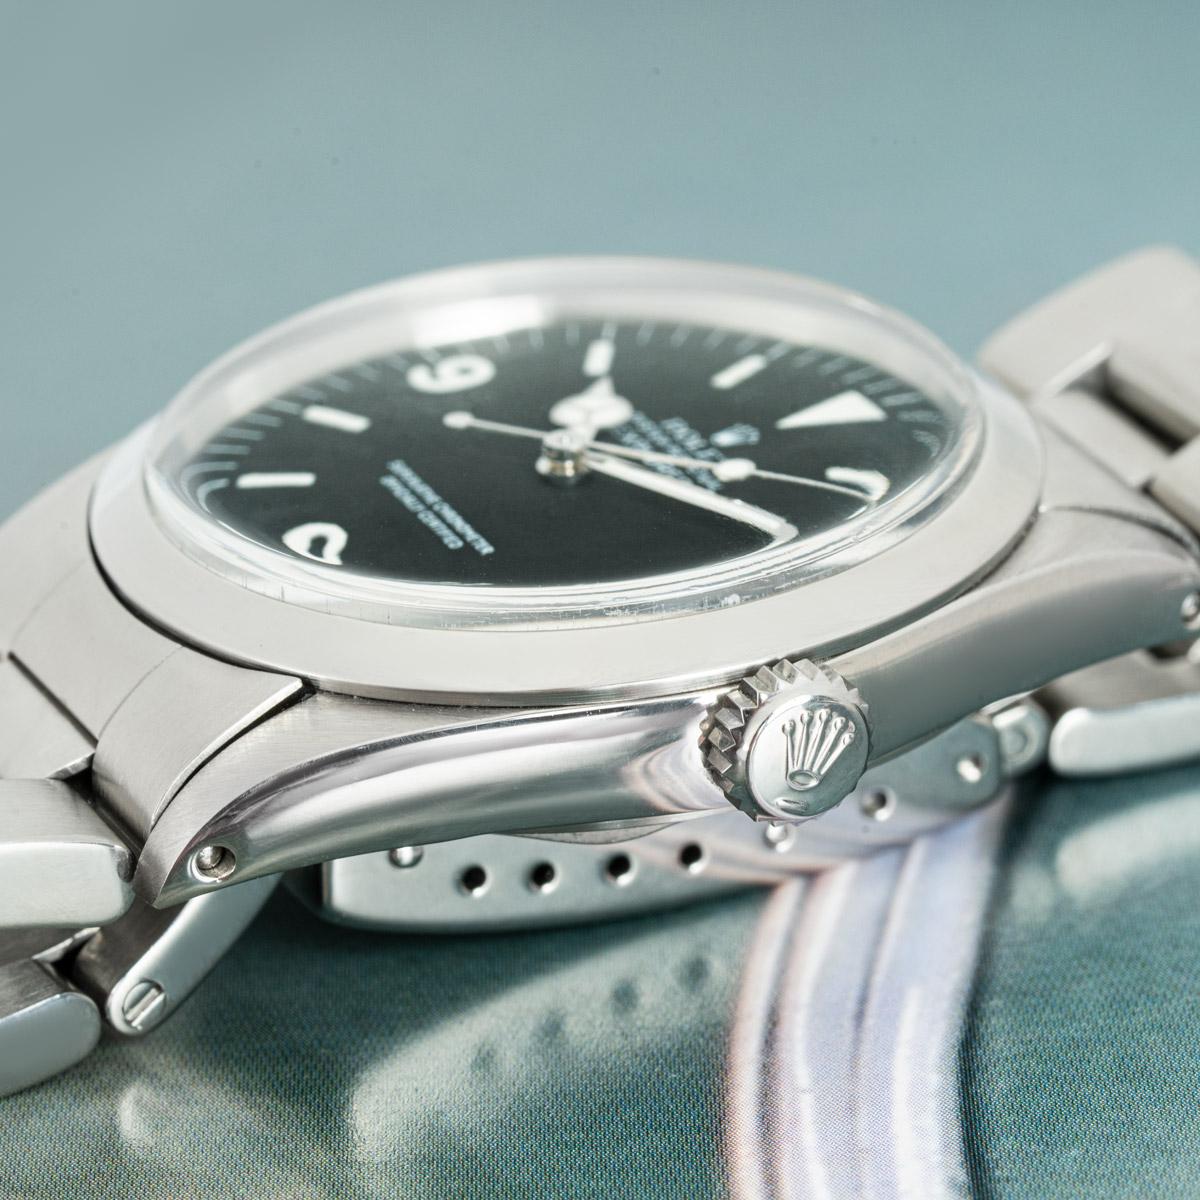 A Rolex Explorer crafted in stainless steel. Featuring a distinctive mark III matte dial with arabic numbers and a fixed stainless steel bezel. Fitted with a plexiglass, a self-winding automatic movement and an Oyster bracelet equipped with a